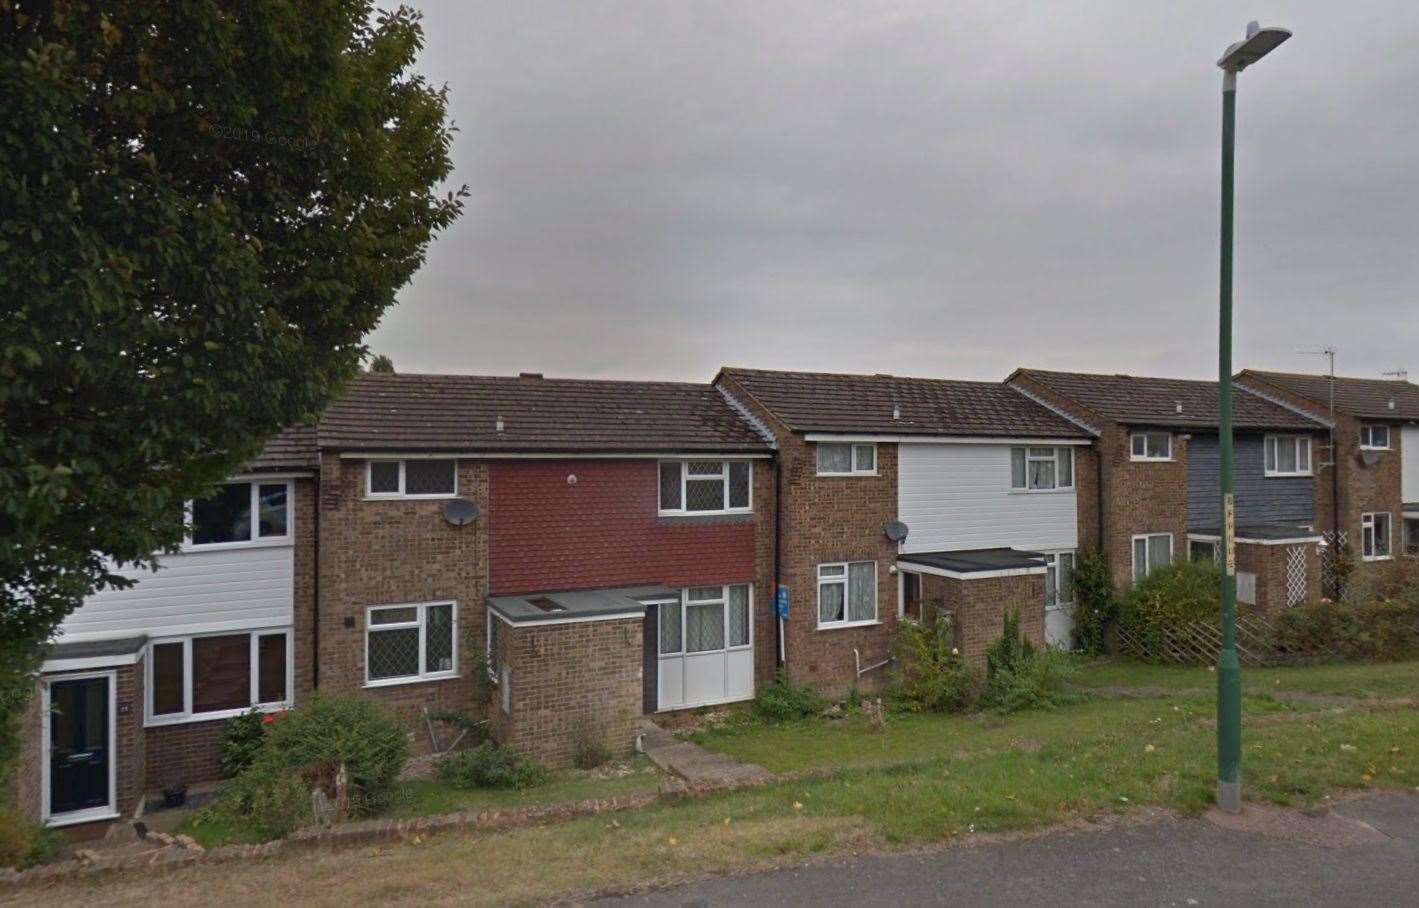 Properties in Brambledown, Longfield, can go for £160,000. Picture: Google